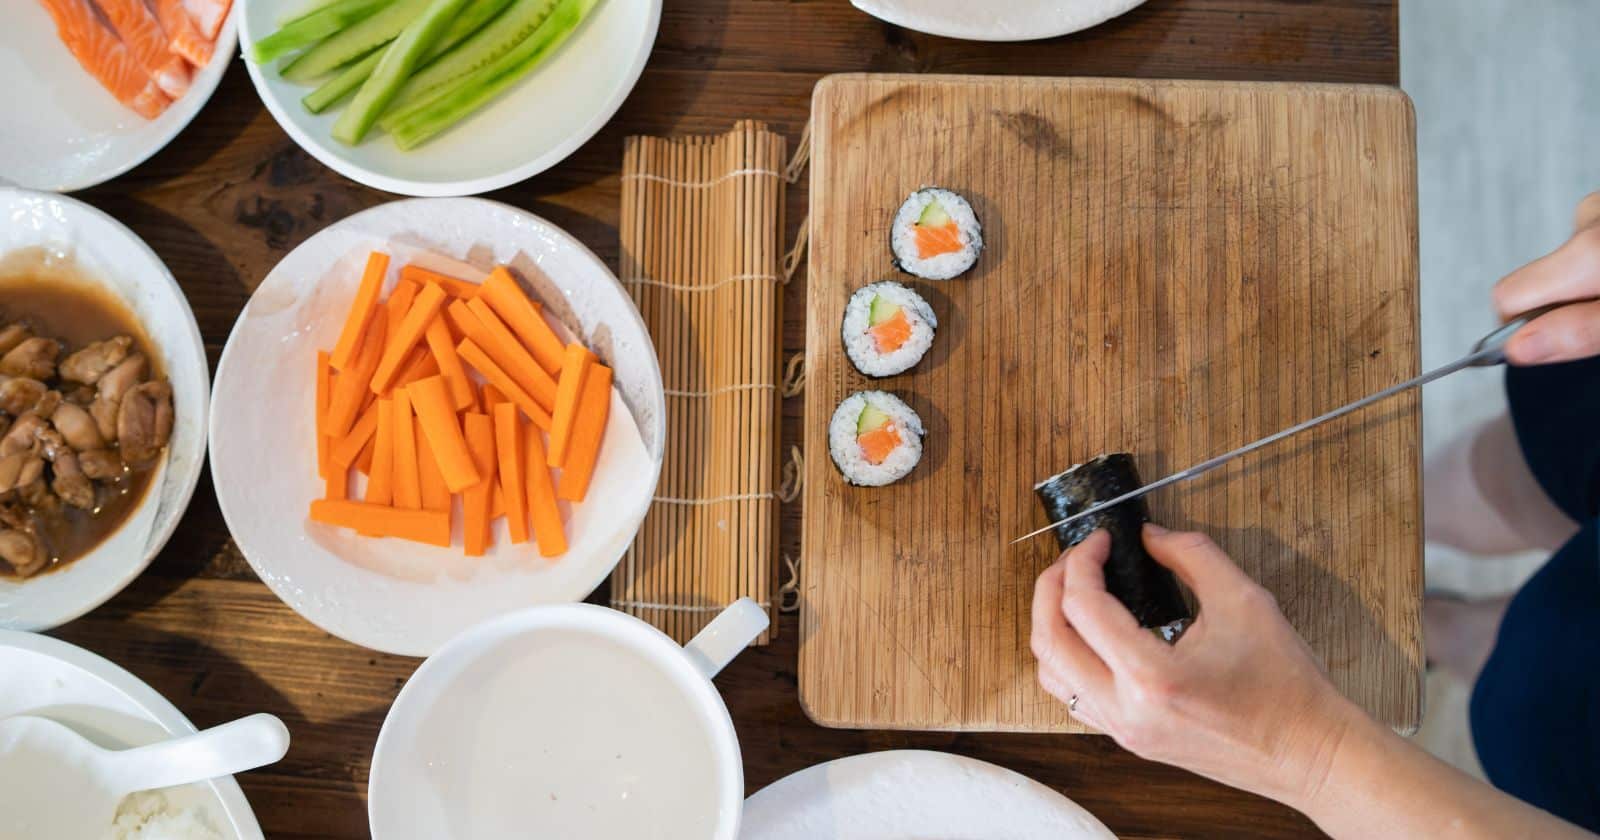 Is it Expensive to Make Sushi at Home?